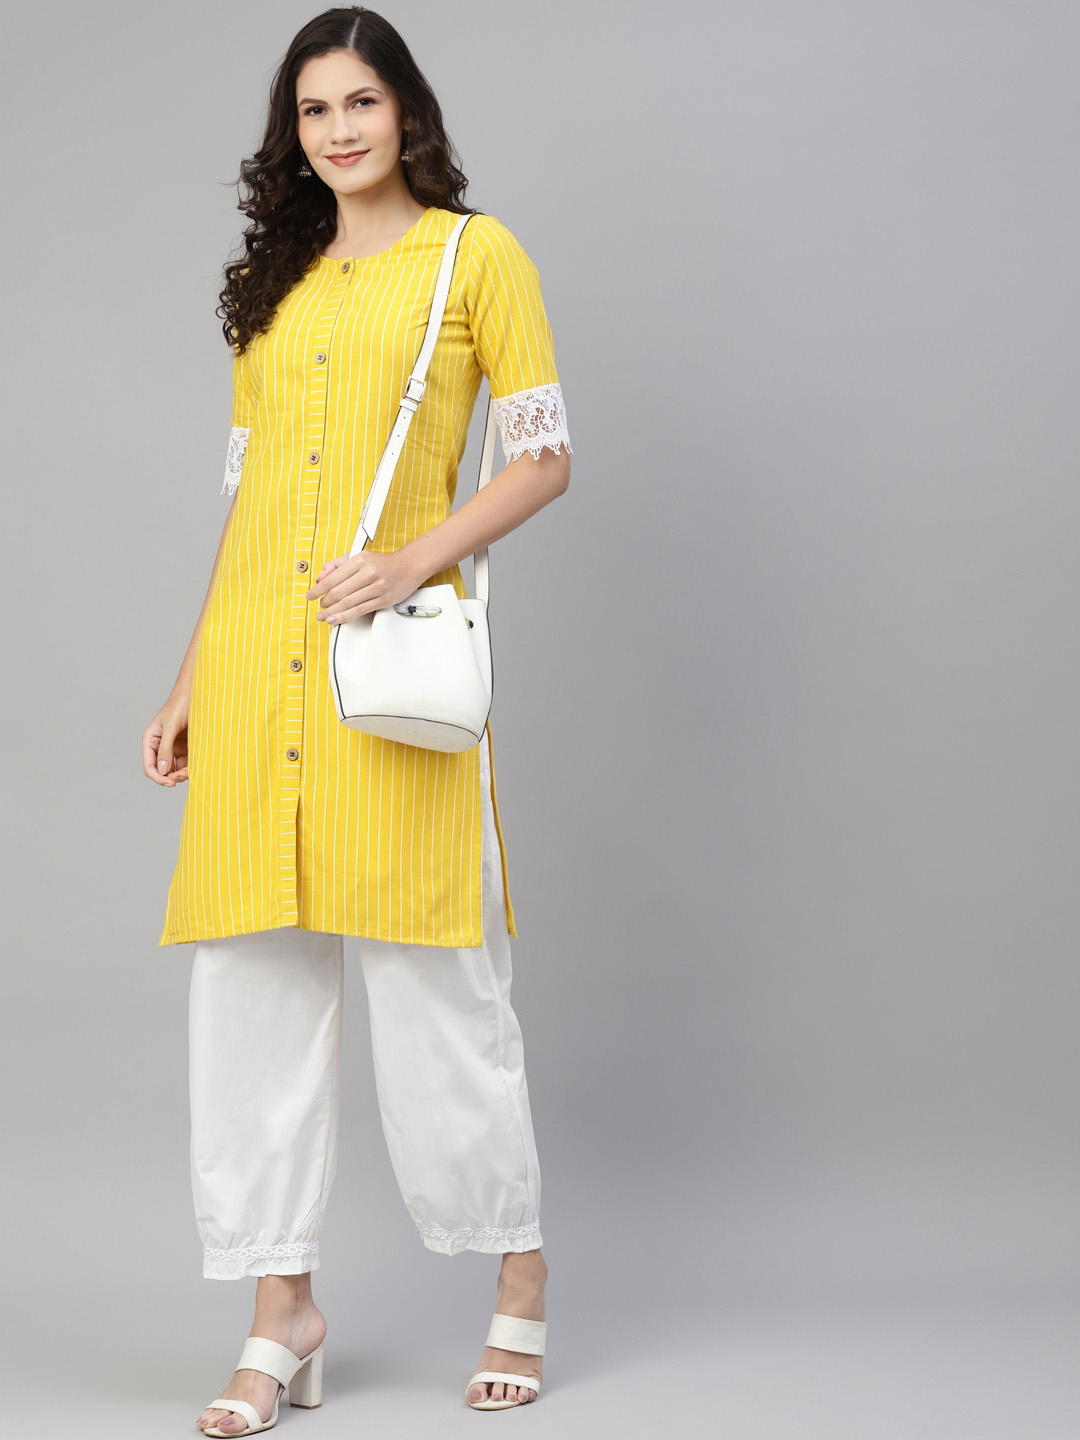 Off-White Solid Lace Frill Pure Cotton Afgan Salwar